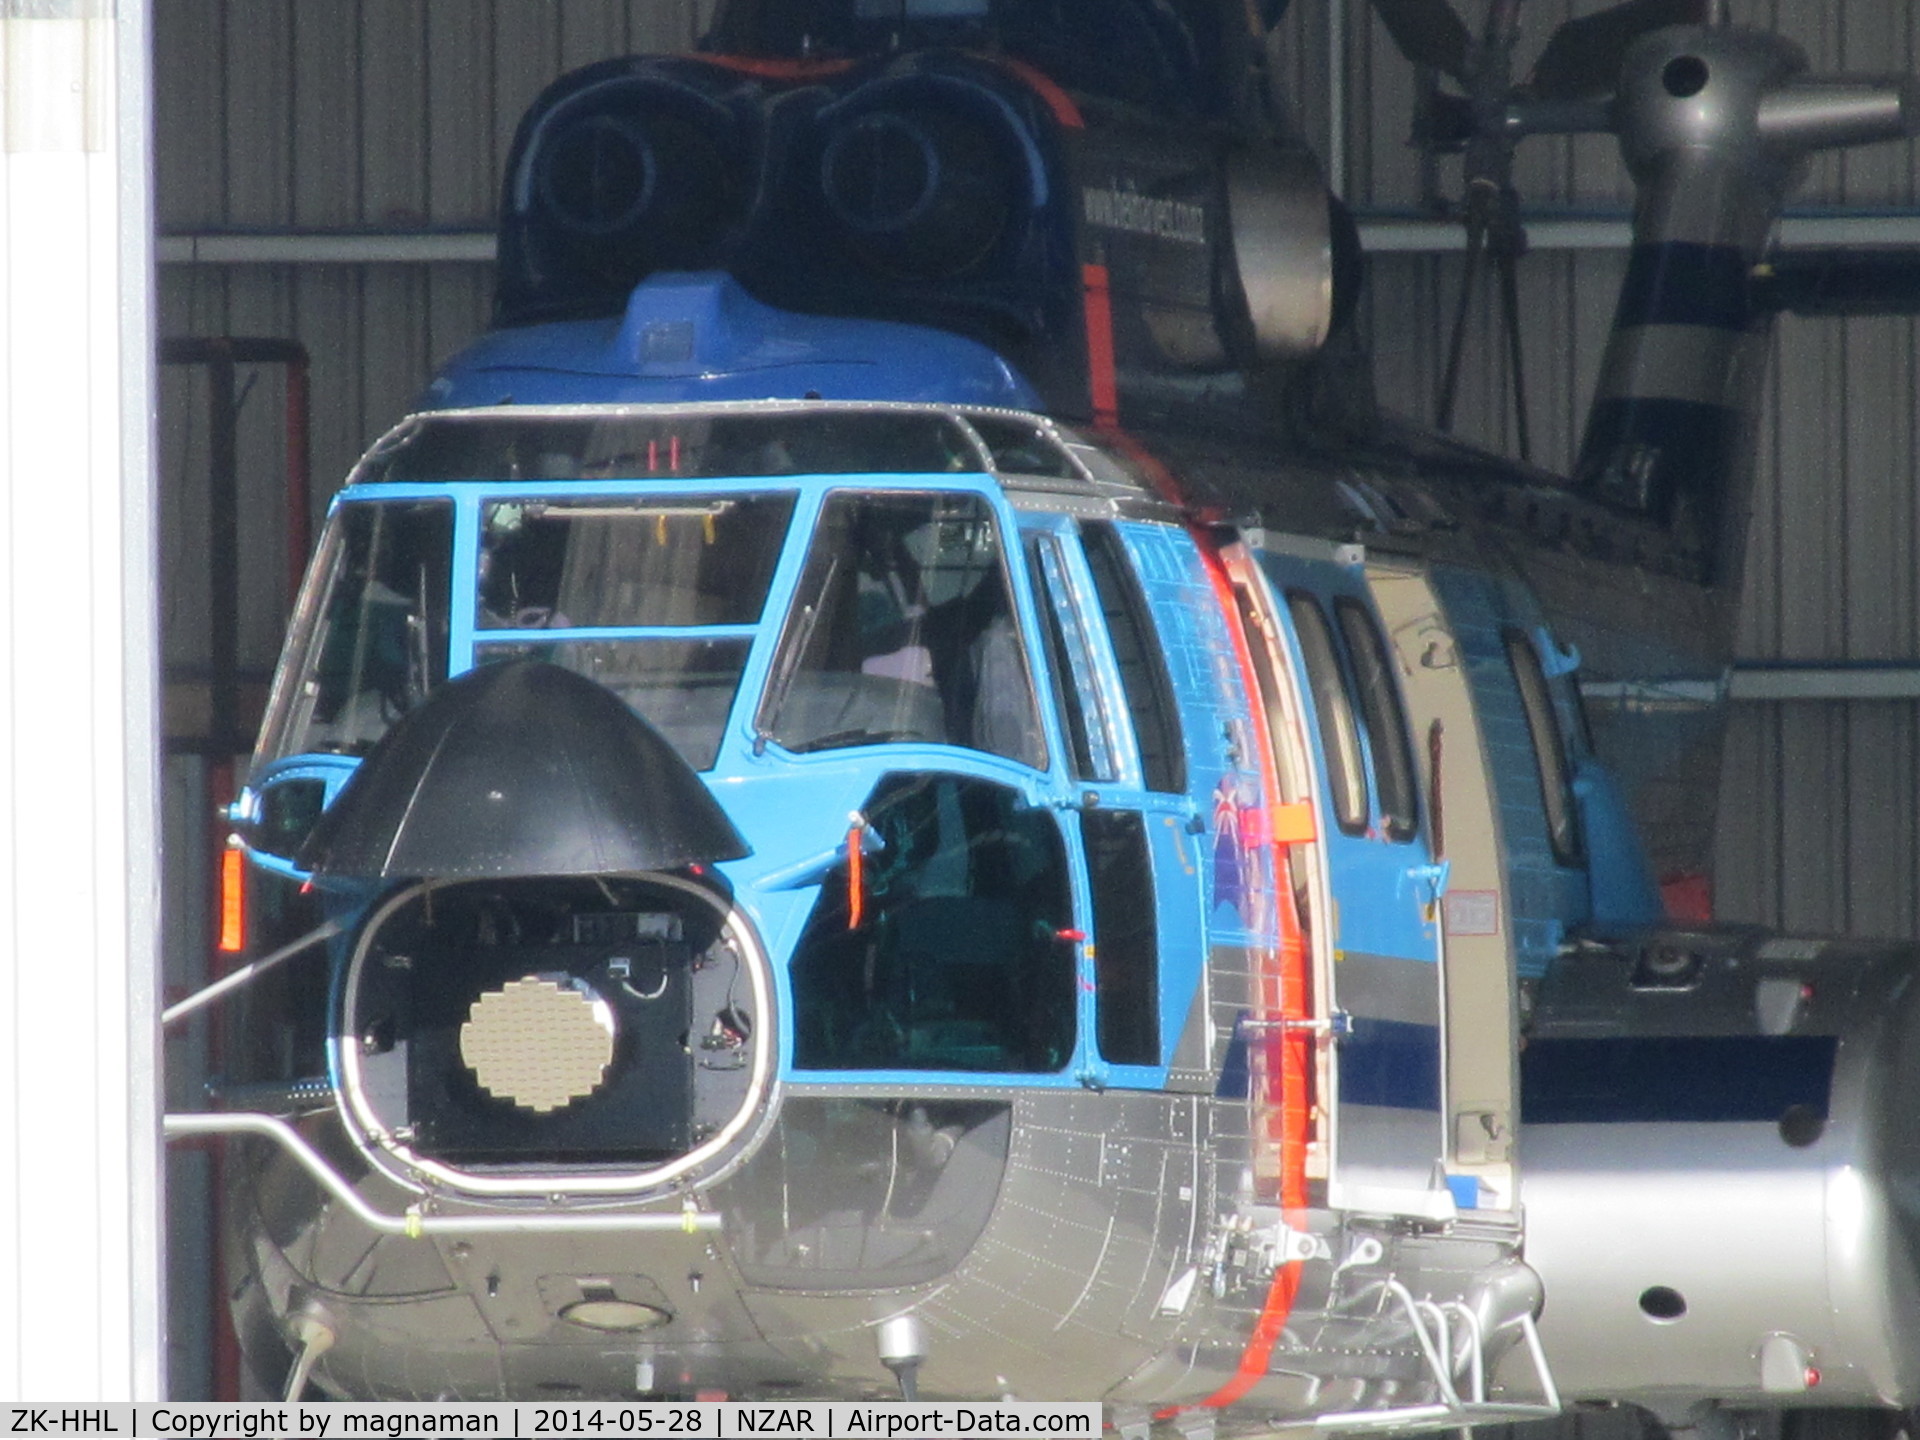 ZK-HHL, Aerospatiale AS-332L Super Puma C/N 2240, Not a R44 but a super puma c/n 2240. It has flown but I have only seen it in the hangar. At least the sun caught it today.